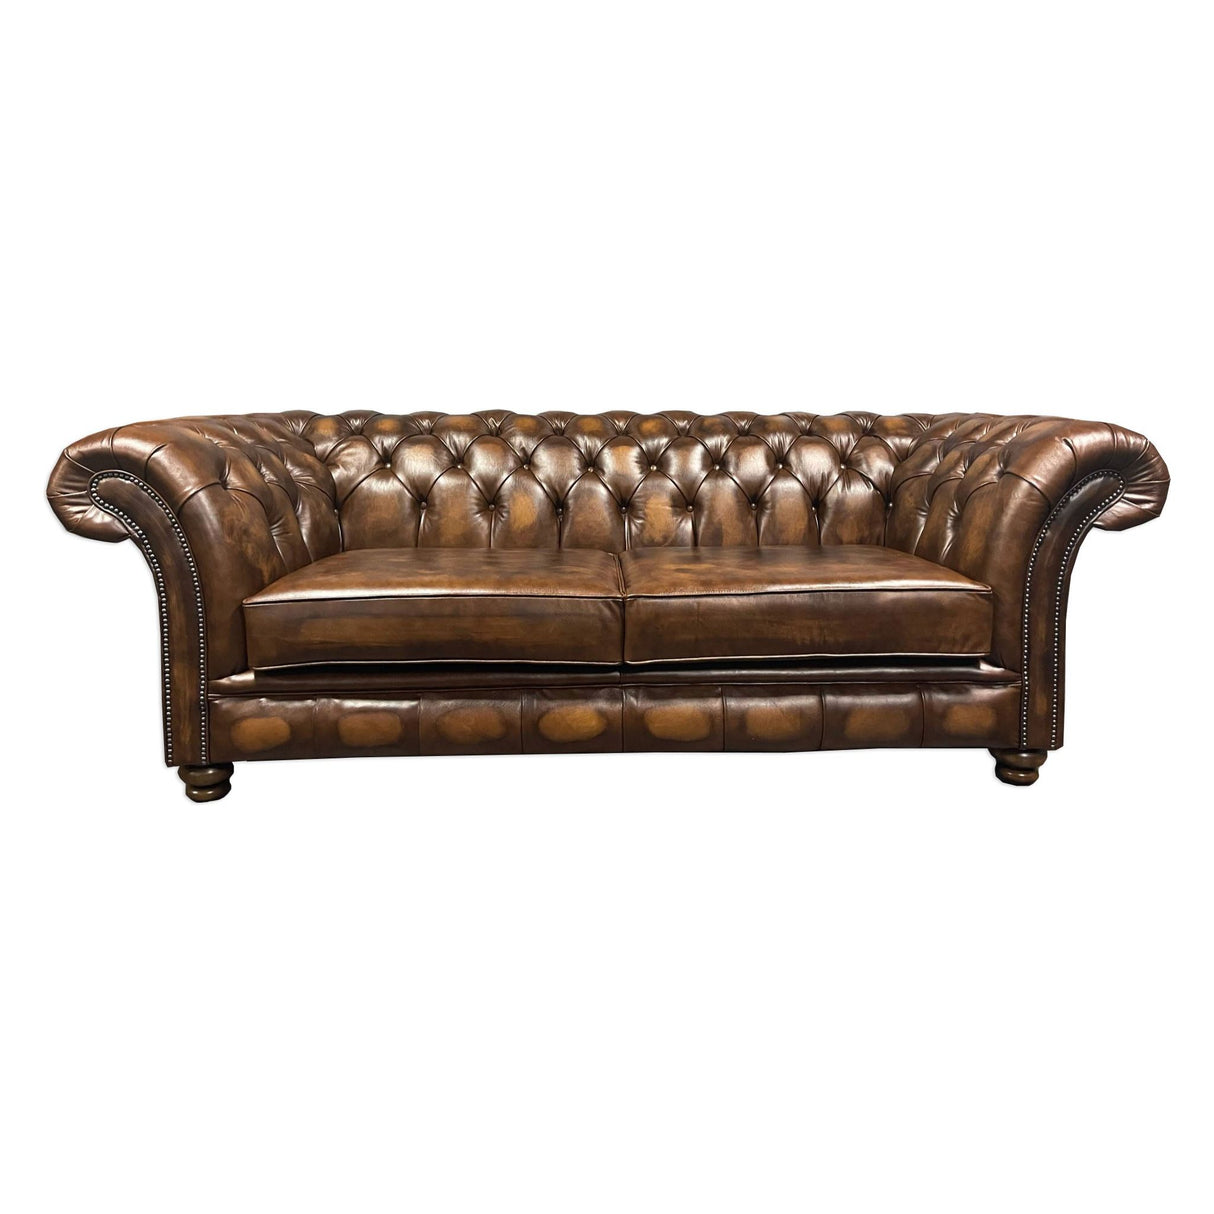 Chesterfield Sofa 3 Seat Antique Tan Leather